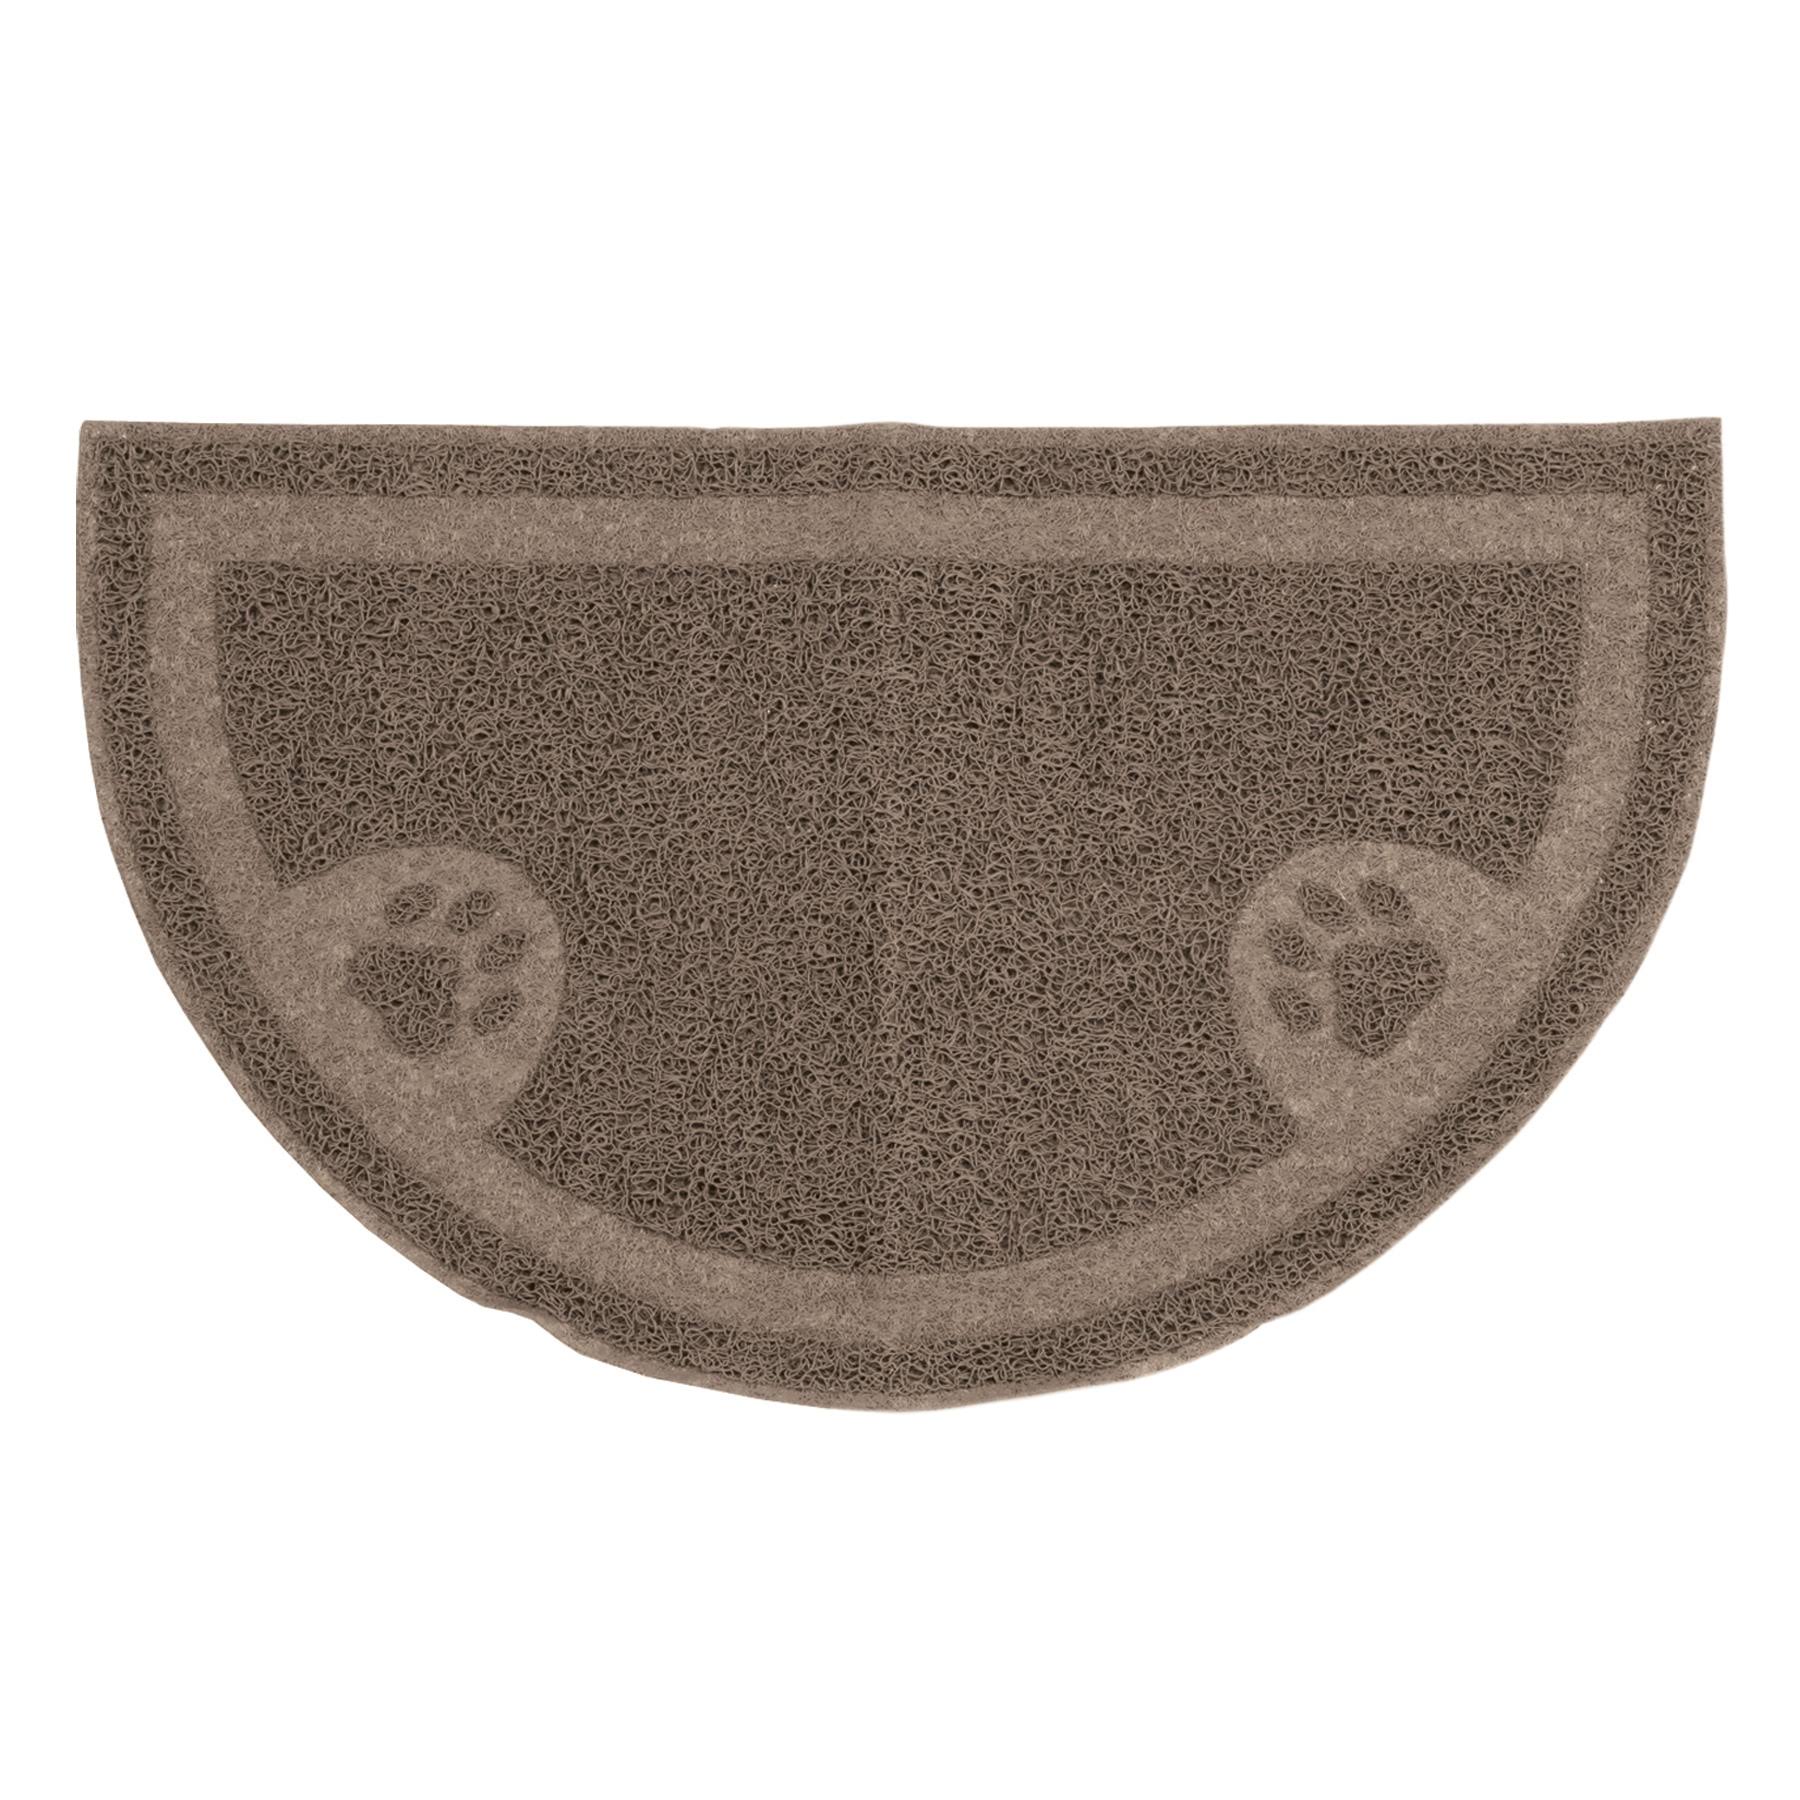 Petmate Arm and Hammer Wedge Litter Mat - Large, 35" x 23"